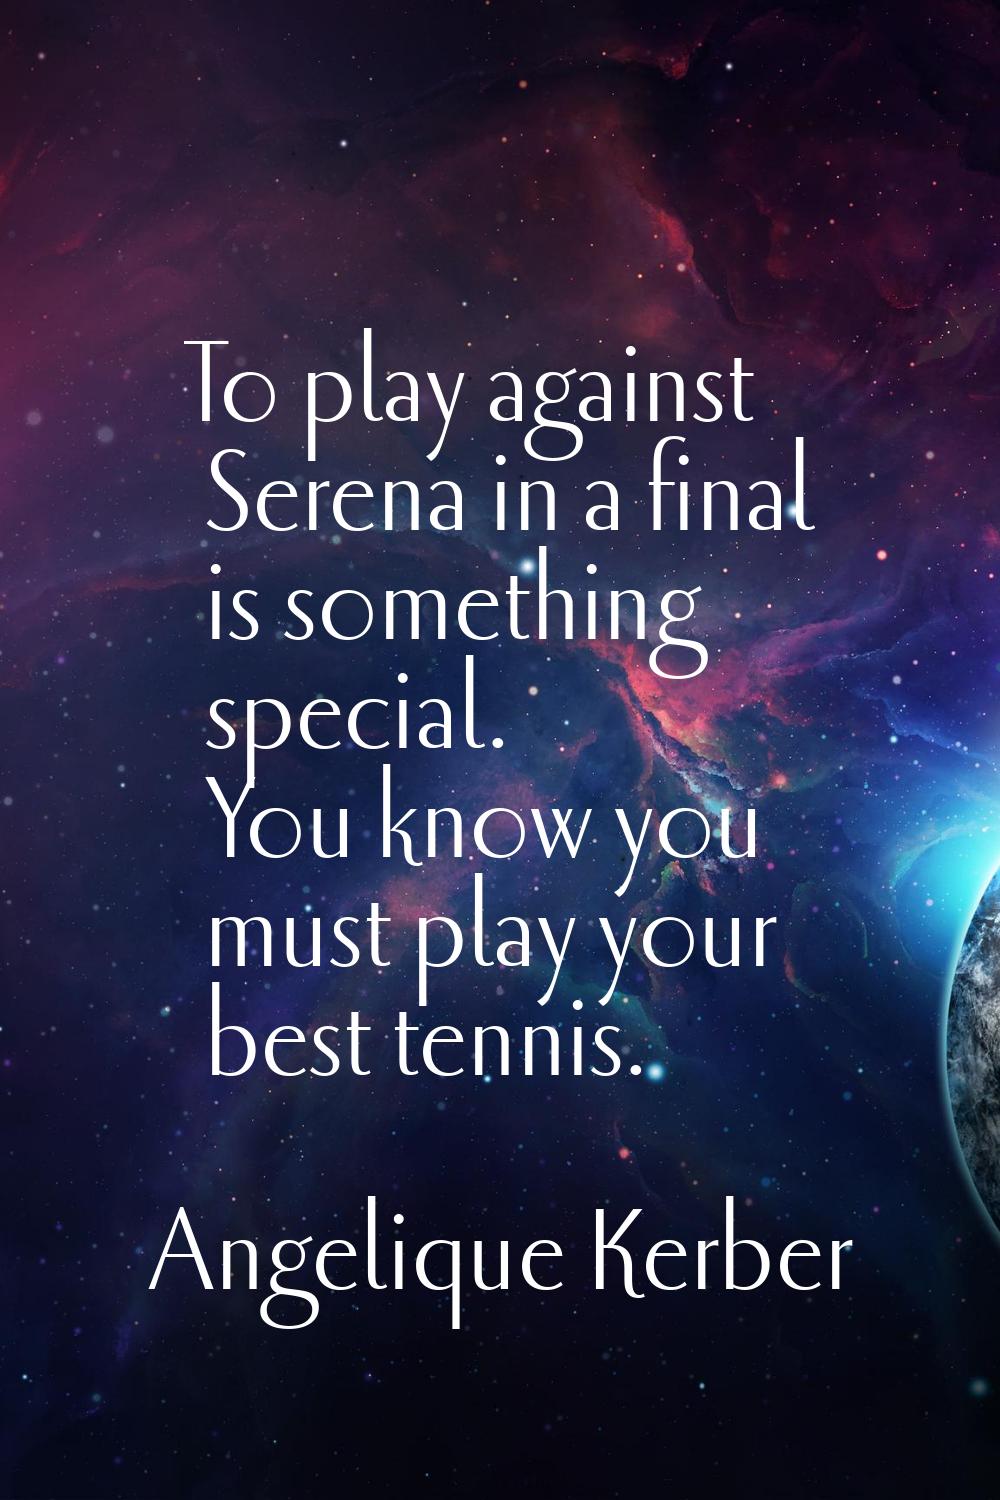 To play against Serena in a final is something special. You know you must play your best tennis.